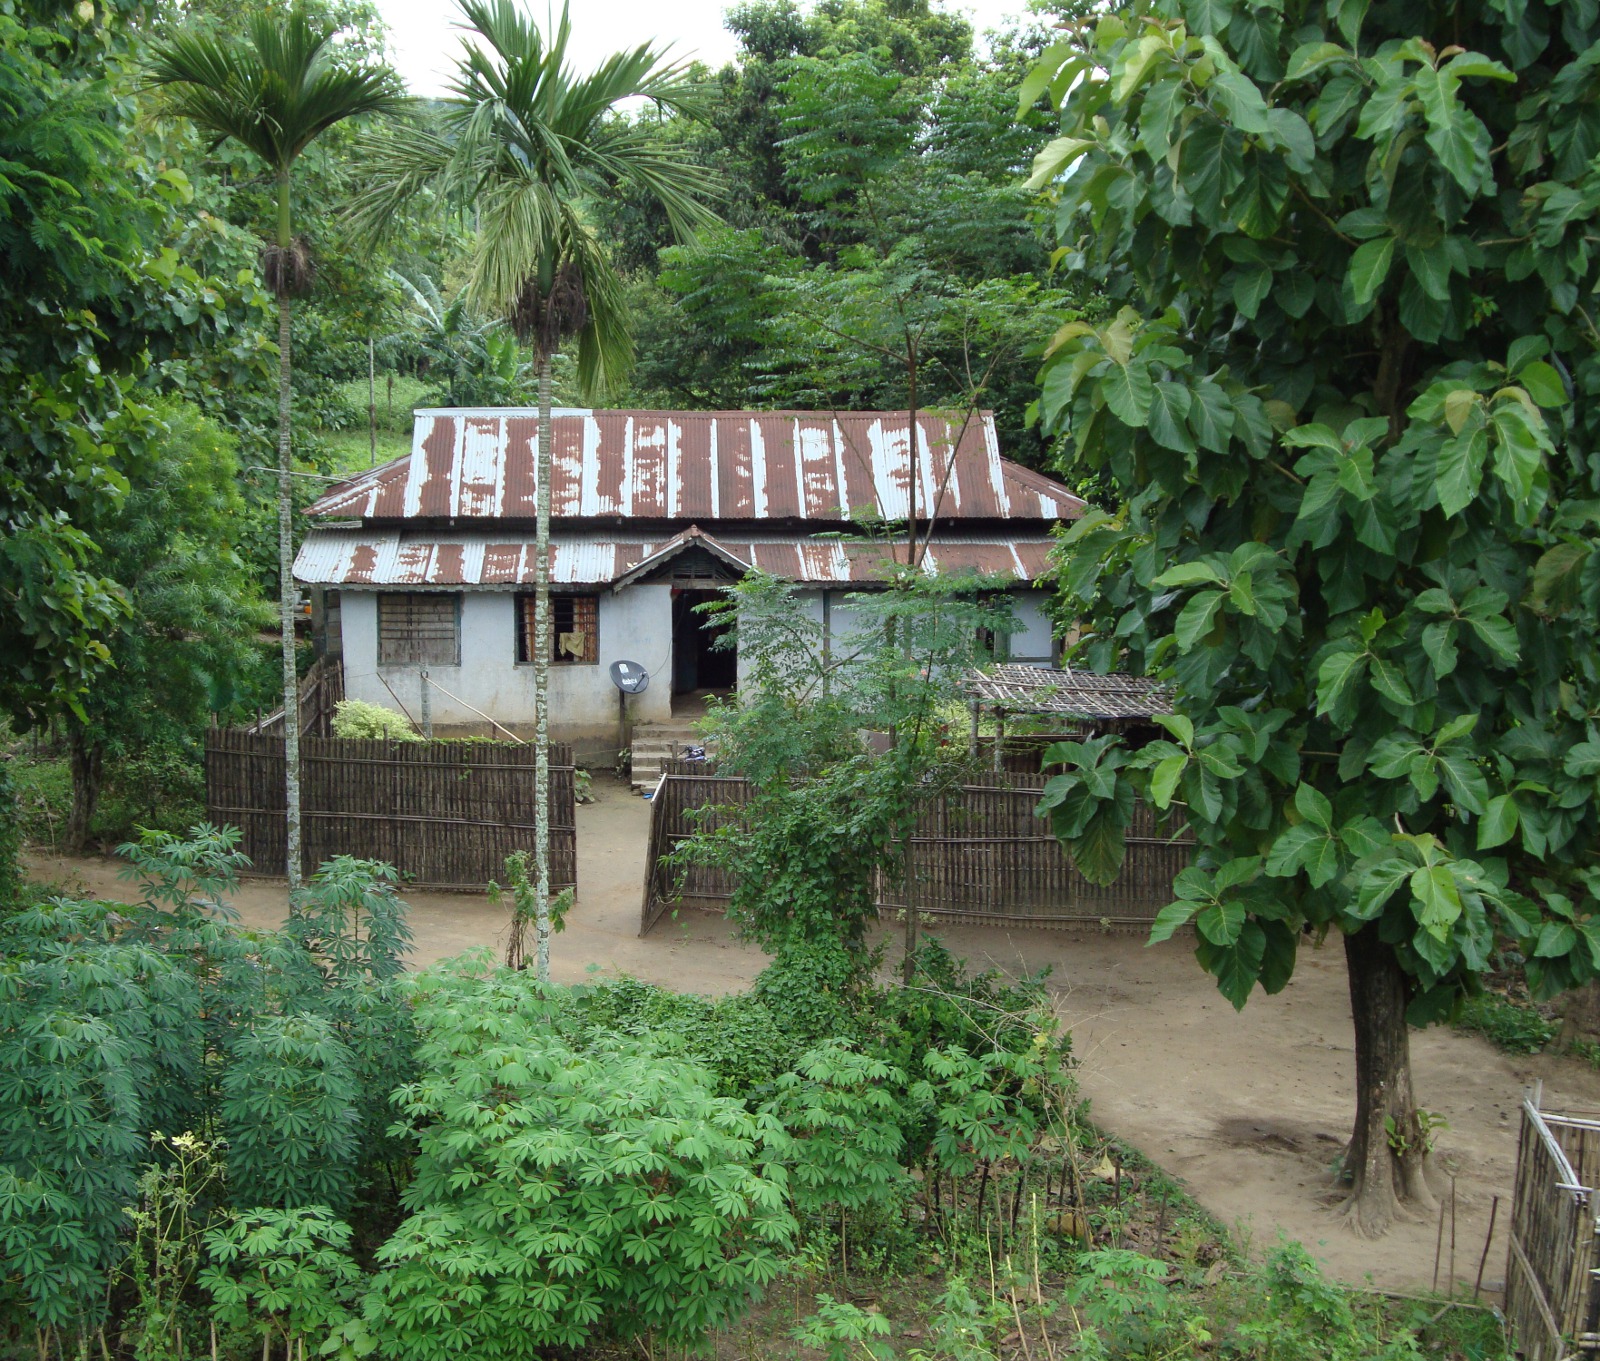 This weathered bungalow in the Garo Hills sports its own satellite dish.